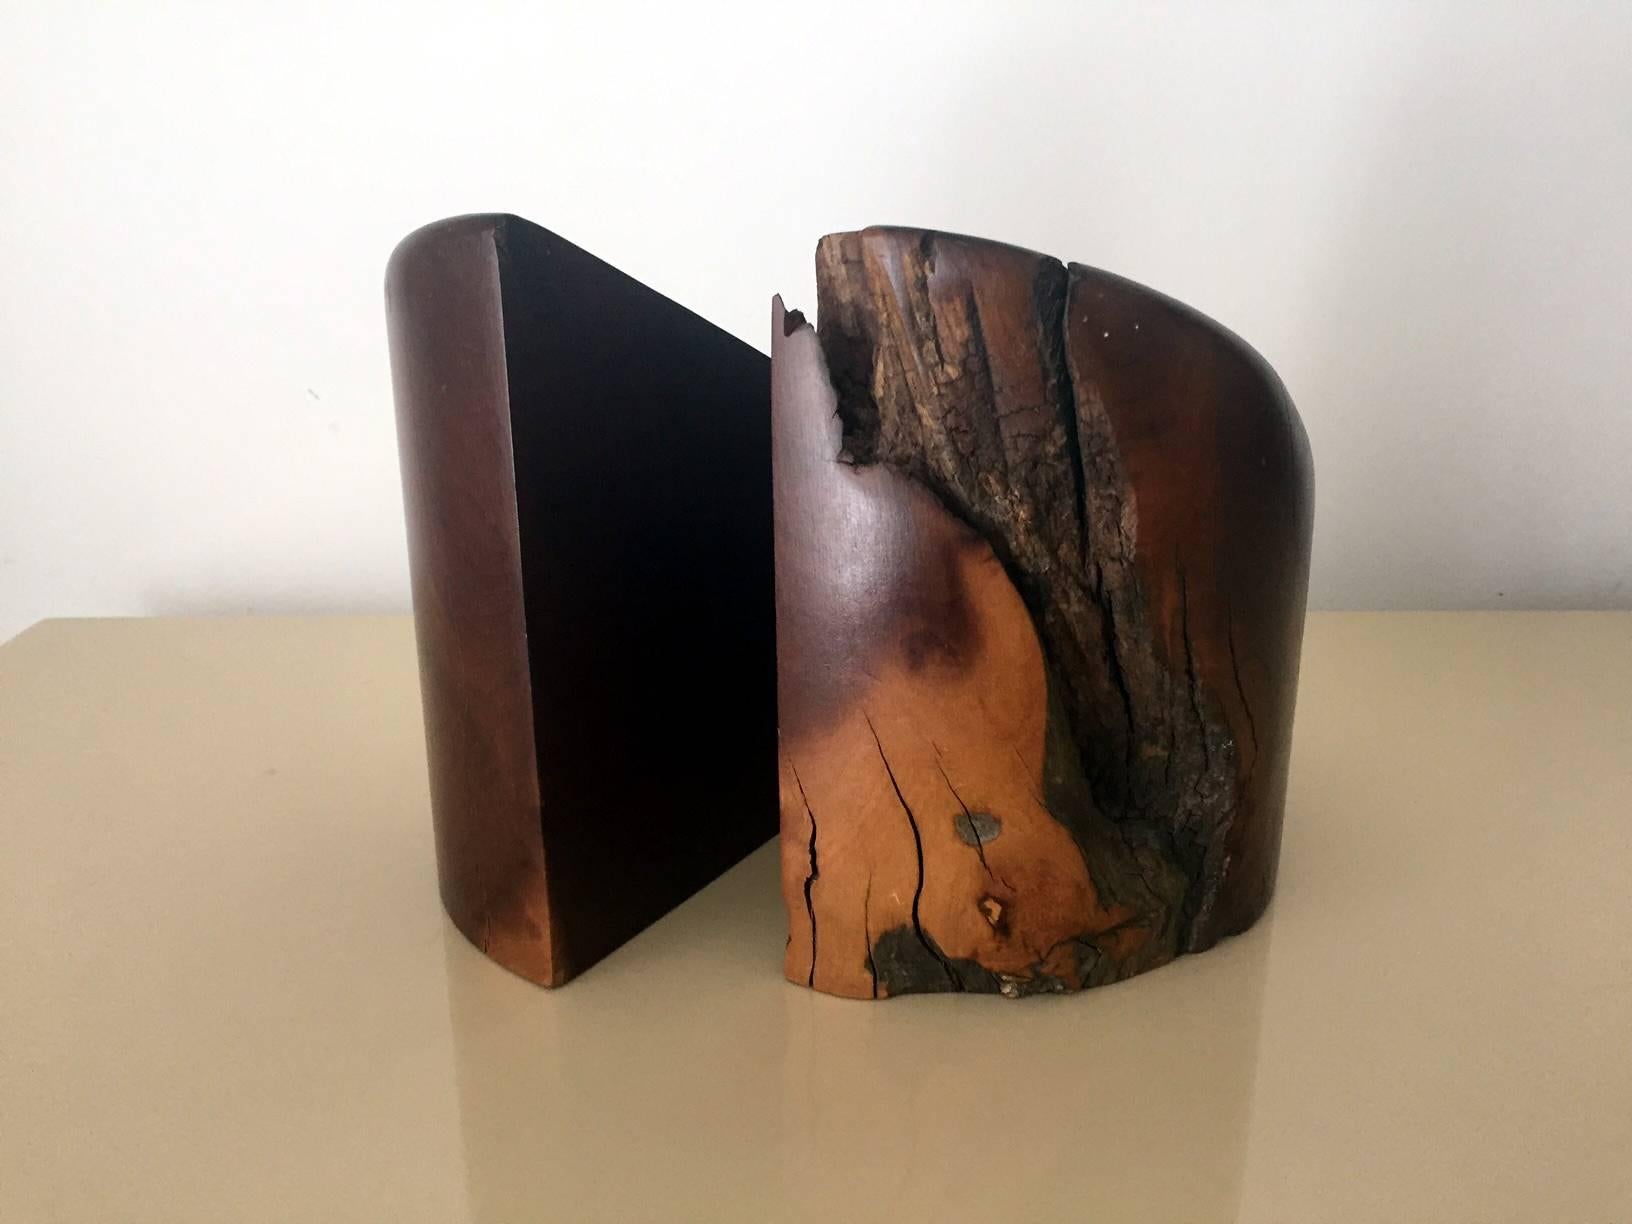 A pair of large heavy bookends designed by Don Shoemaker and made by Señal S.A. Mexico. Made from natural cocobolo, the Mexican rosewood. They feature beautiful wood grains, natural cracks, wormholes, all the imperfections that reflect beauty of